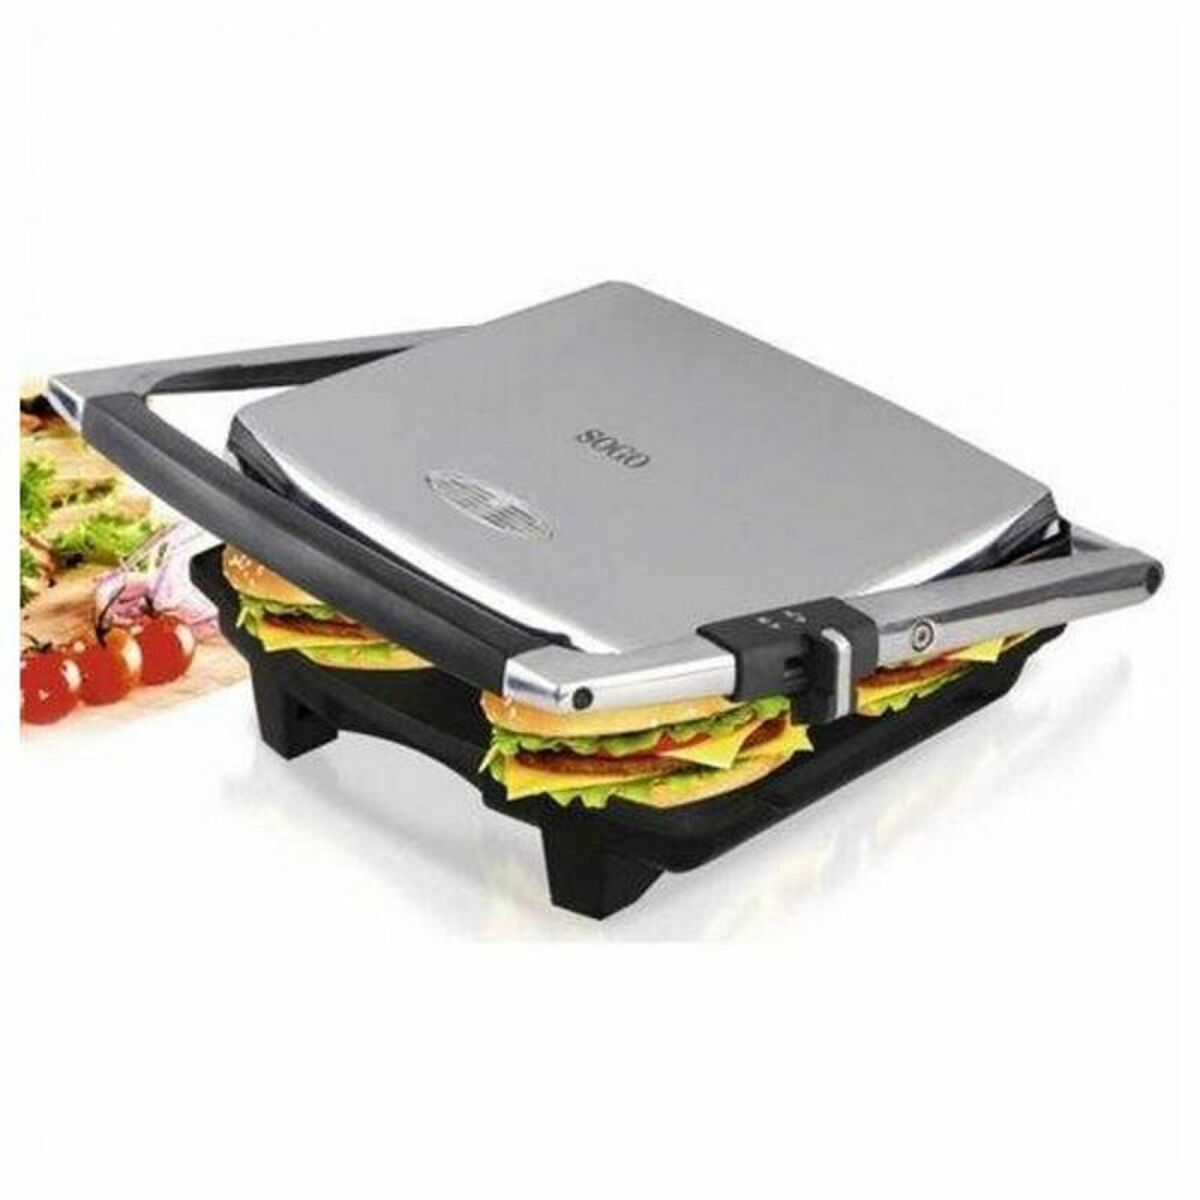 Contactgrillstand Sogo SAN-SS-7133 2000W